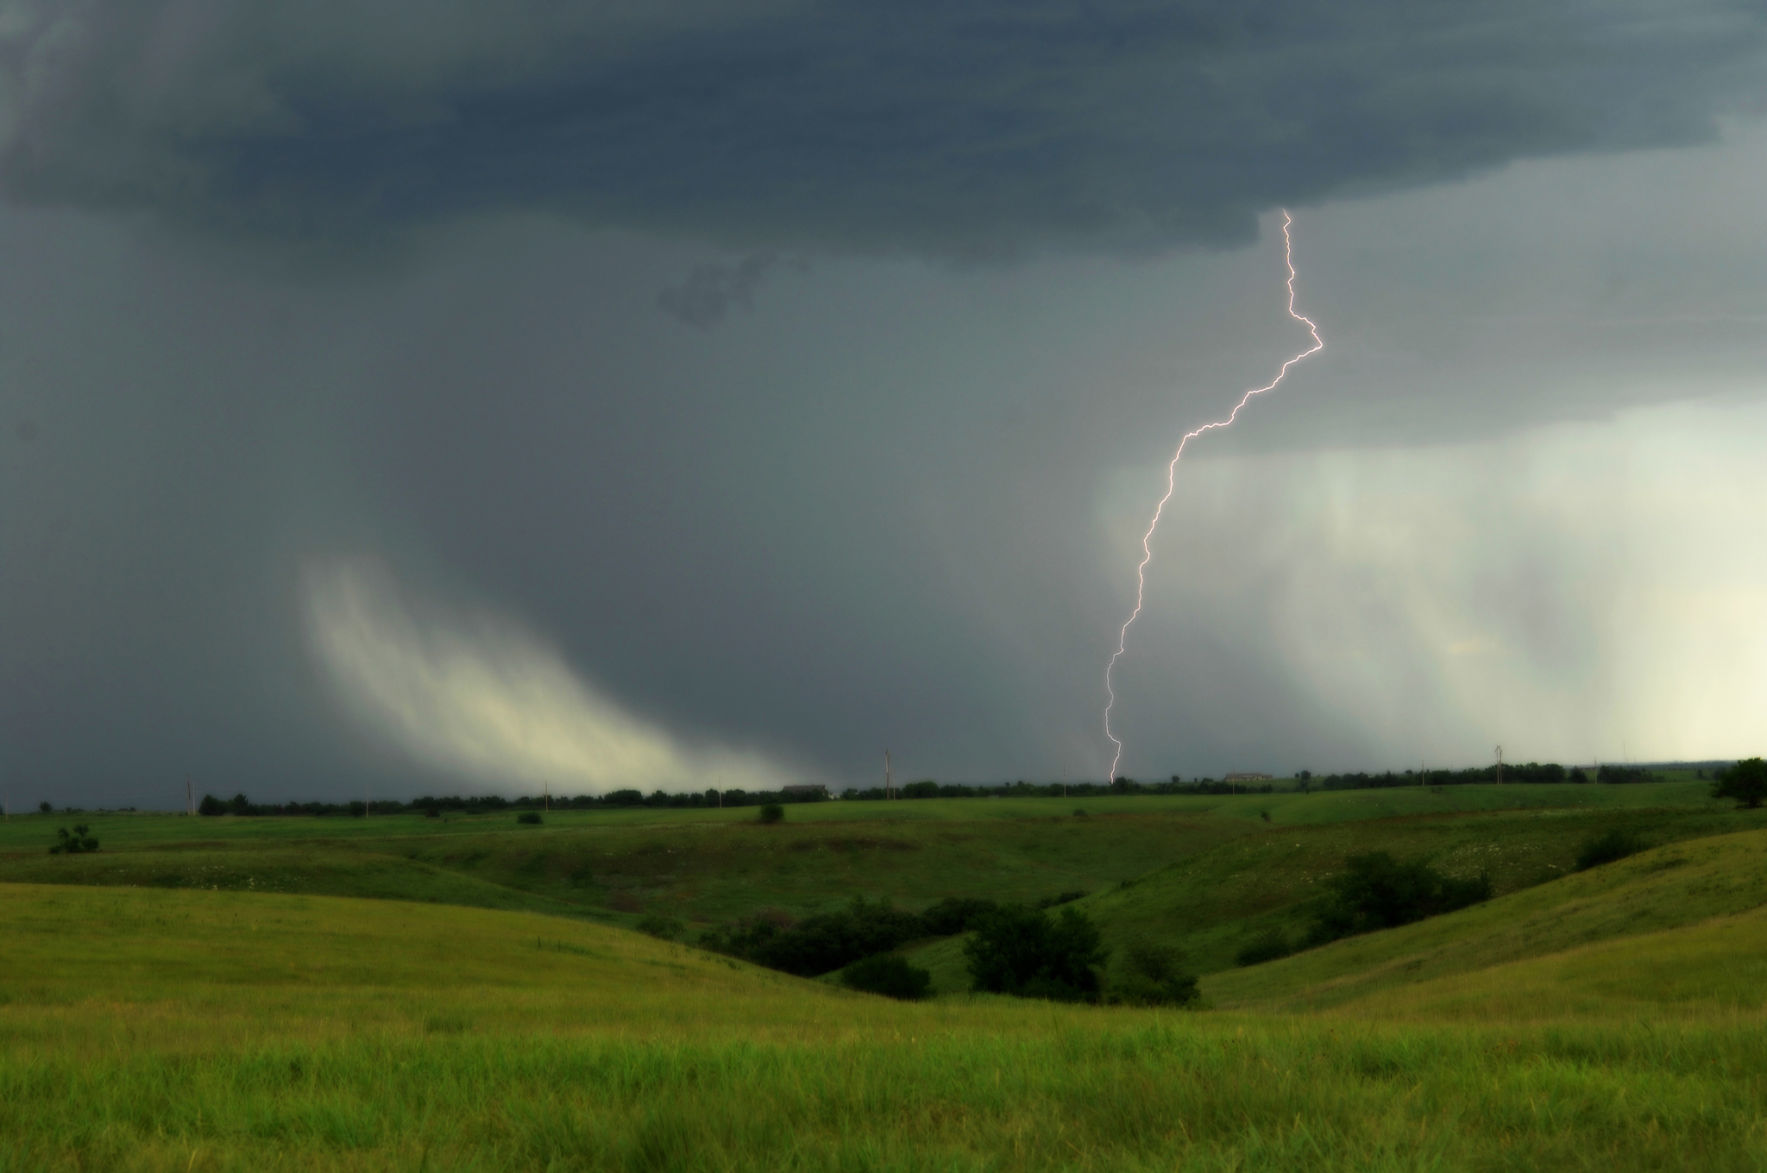 A sharp contrast in the air masses causes severe weather—thunderstorms and tornadoes. The contrast can be in temperature or in the amount of moisture, particularly if there is a dry line of air behind the storm system, said K-State climatologist Mary Knapp. (Courtesy photo taken near Manhattan, Kansas, by Dan Donnert.)